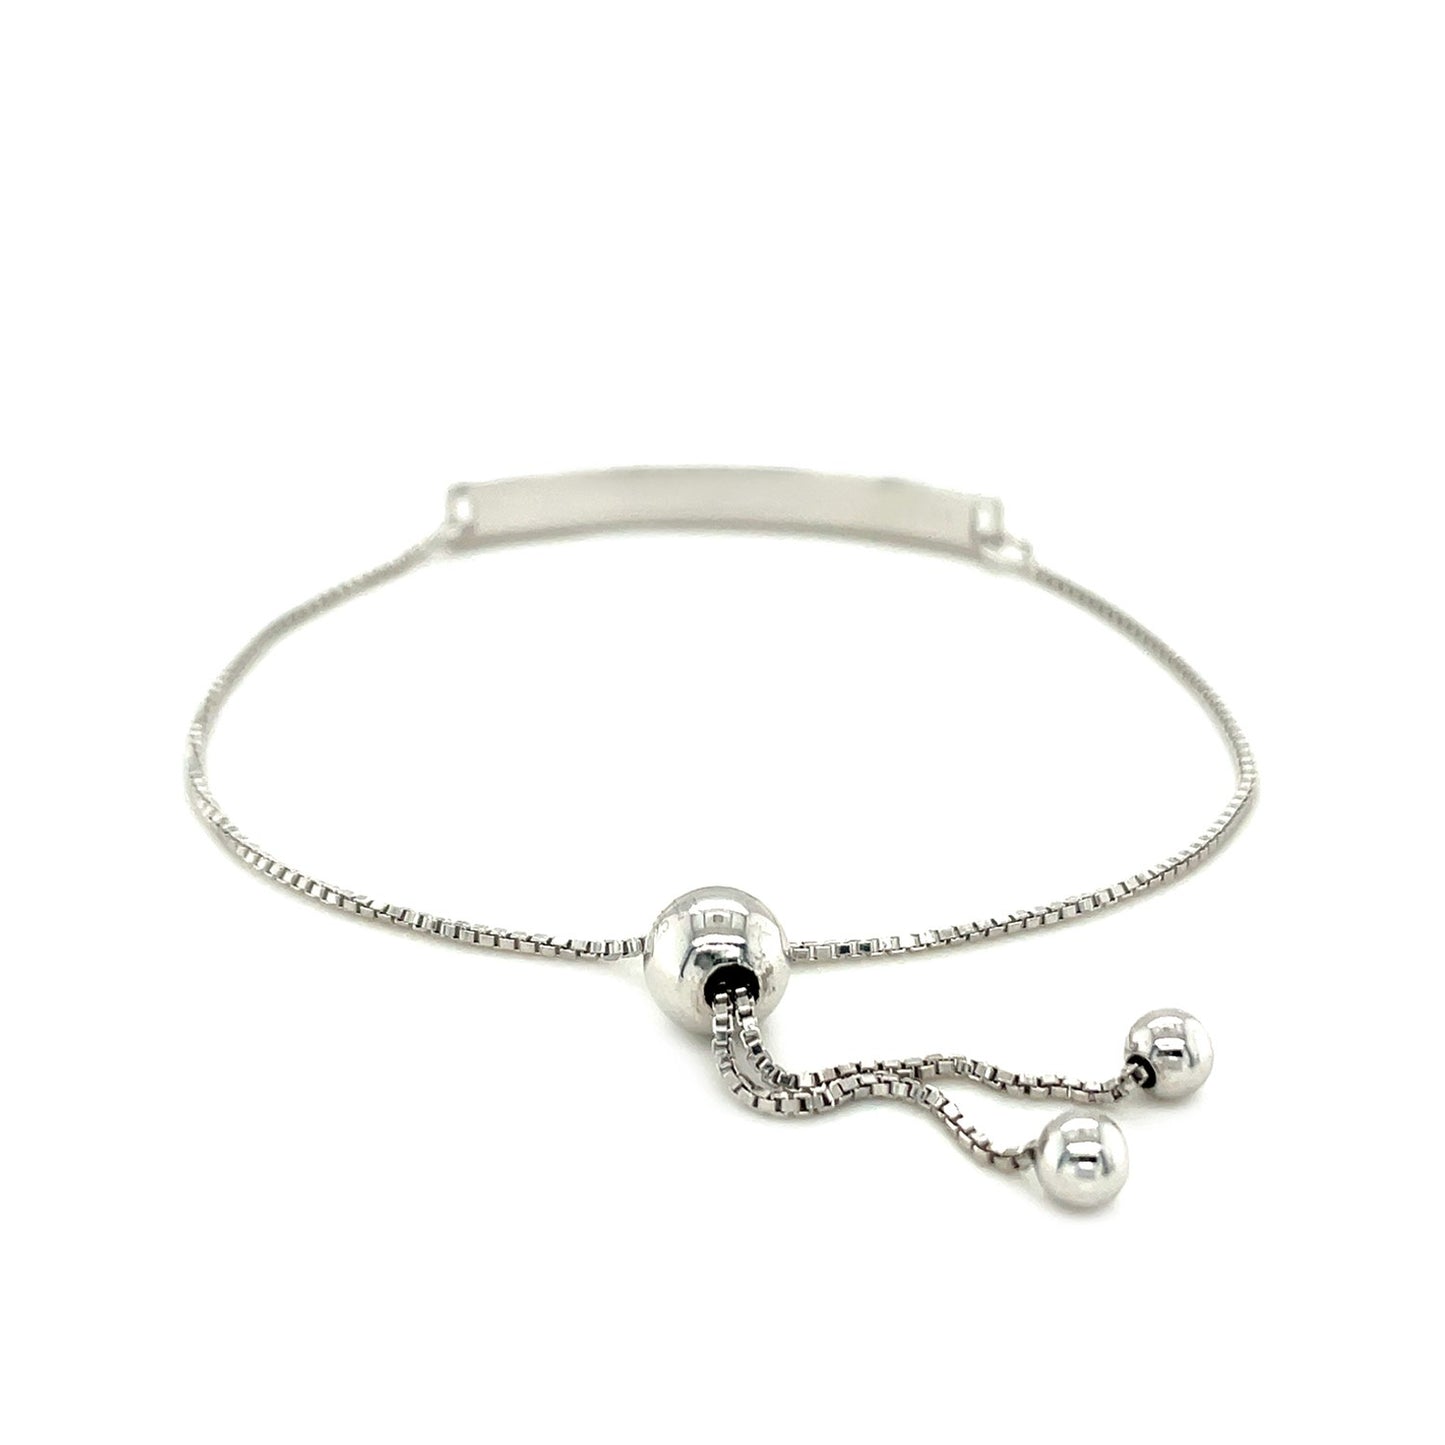 Sterling Silver Adjustable I Love You to the Moon and Back Bracelet